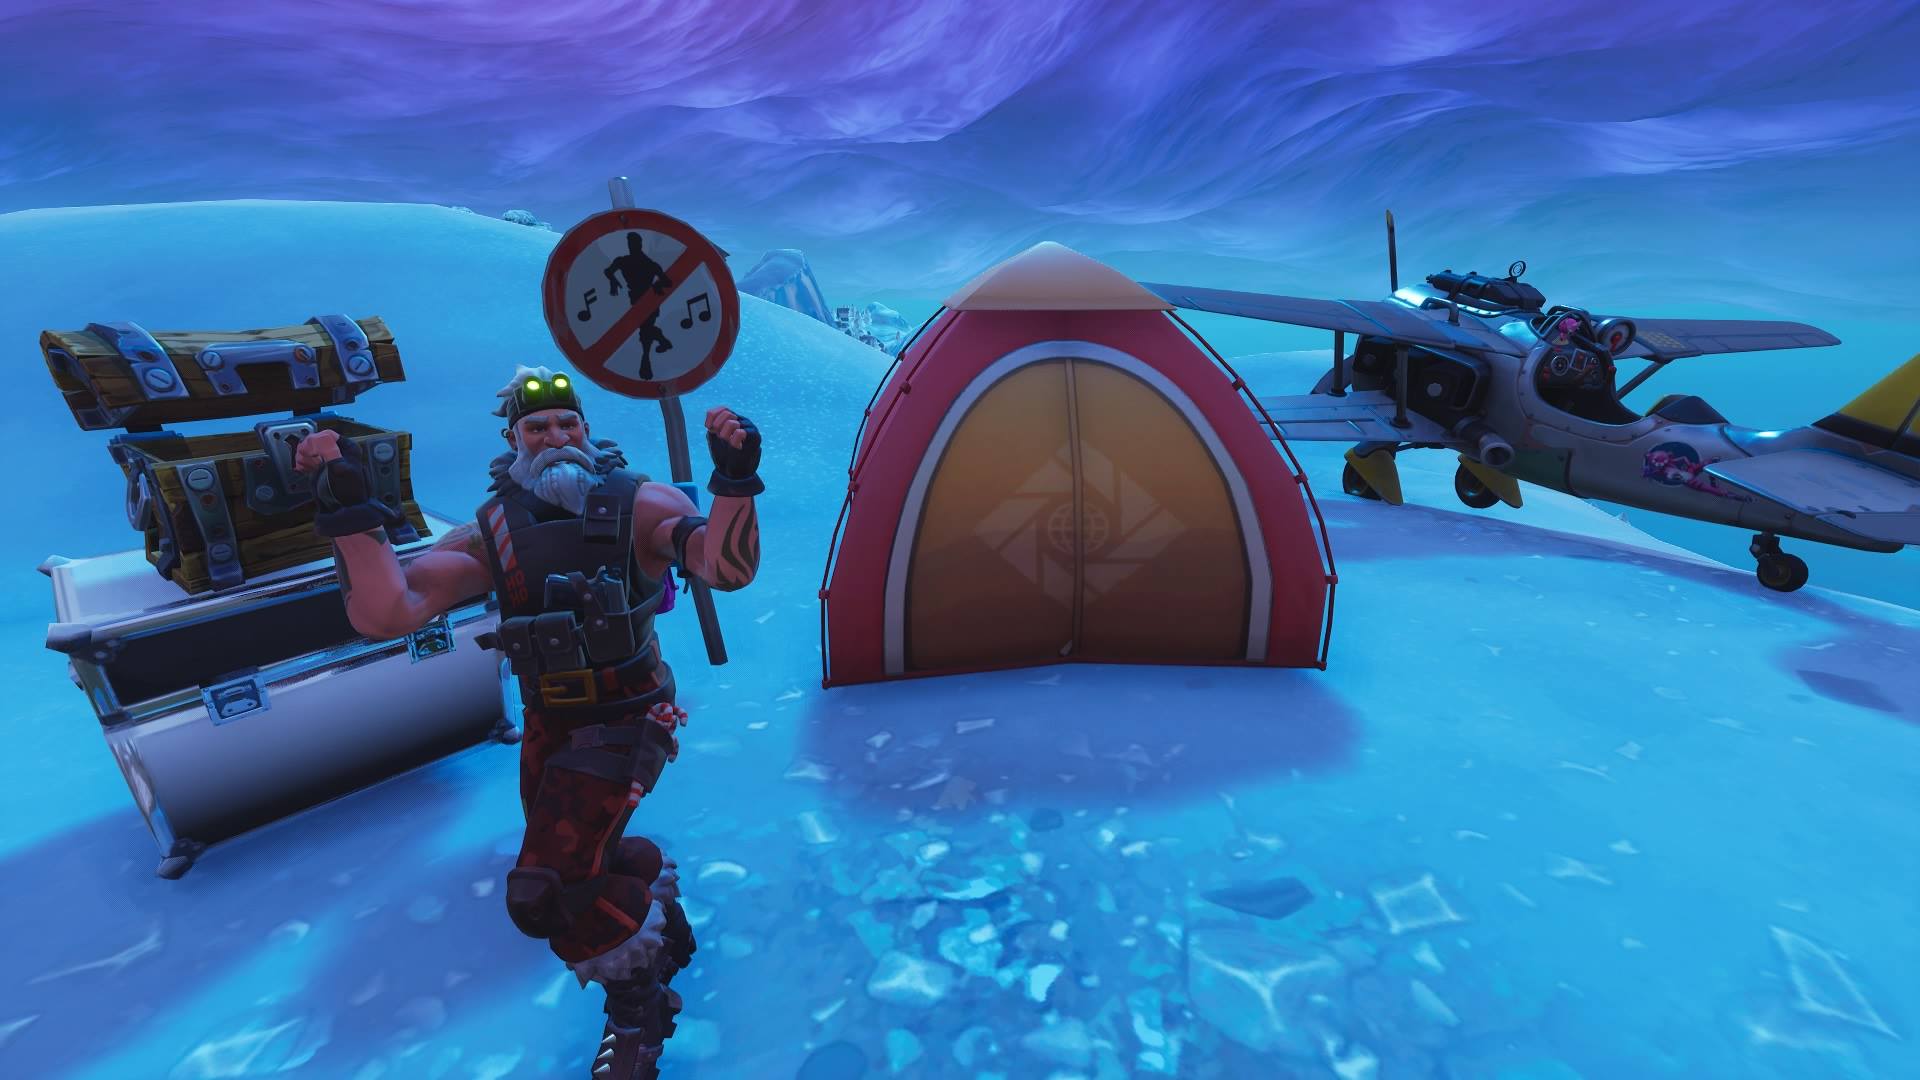 Fortnite Forbidden Dance Locations Video Map And Guide For Season 7 - 